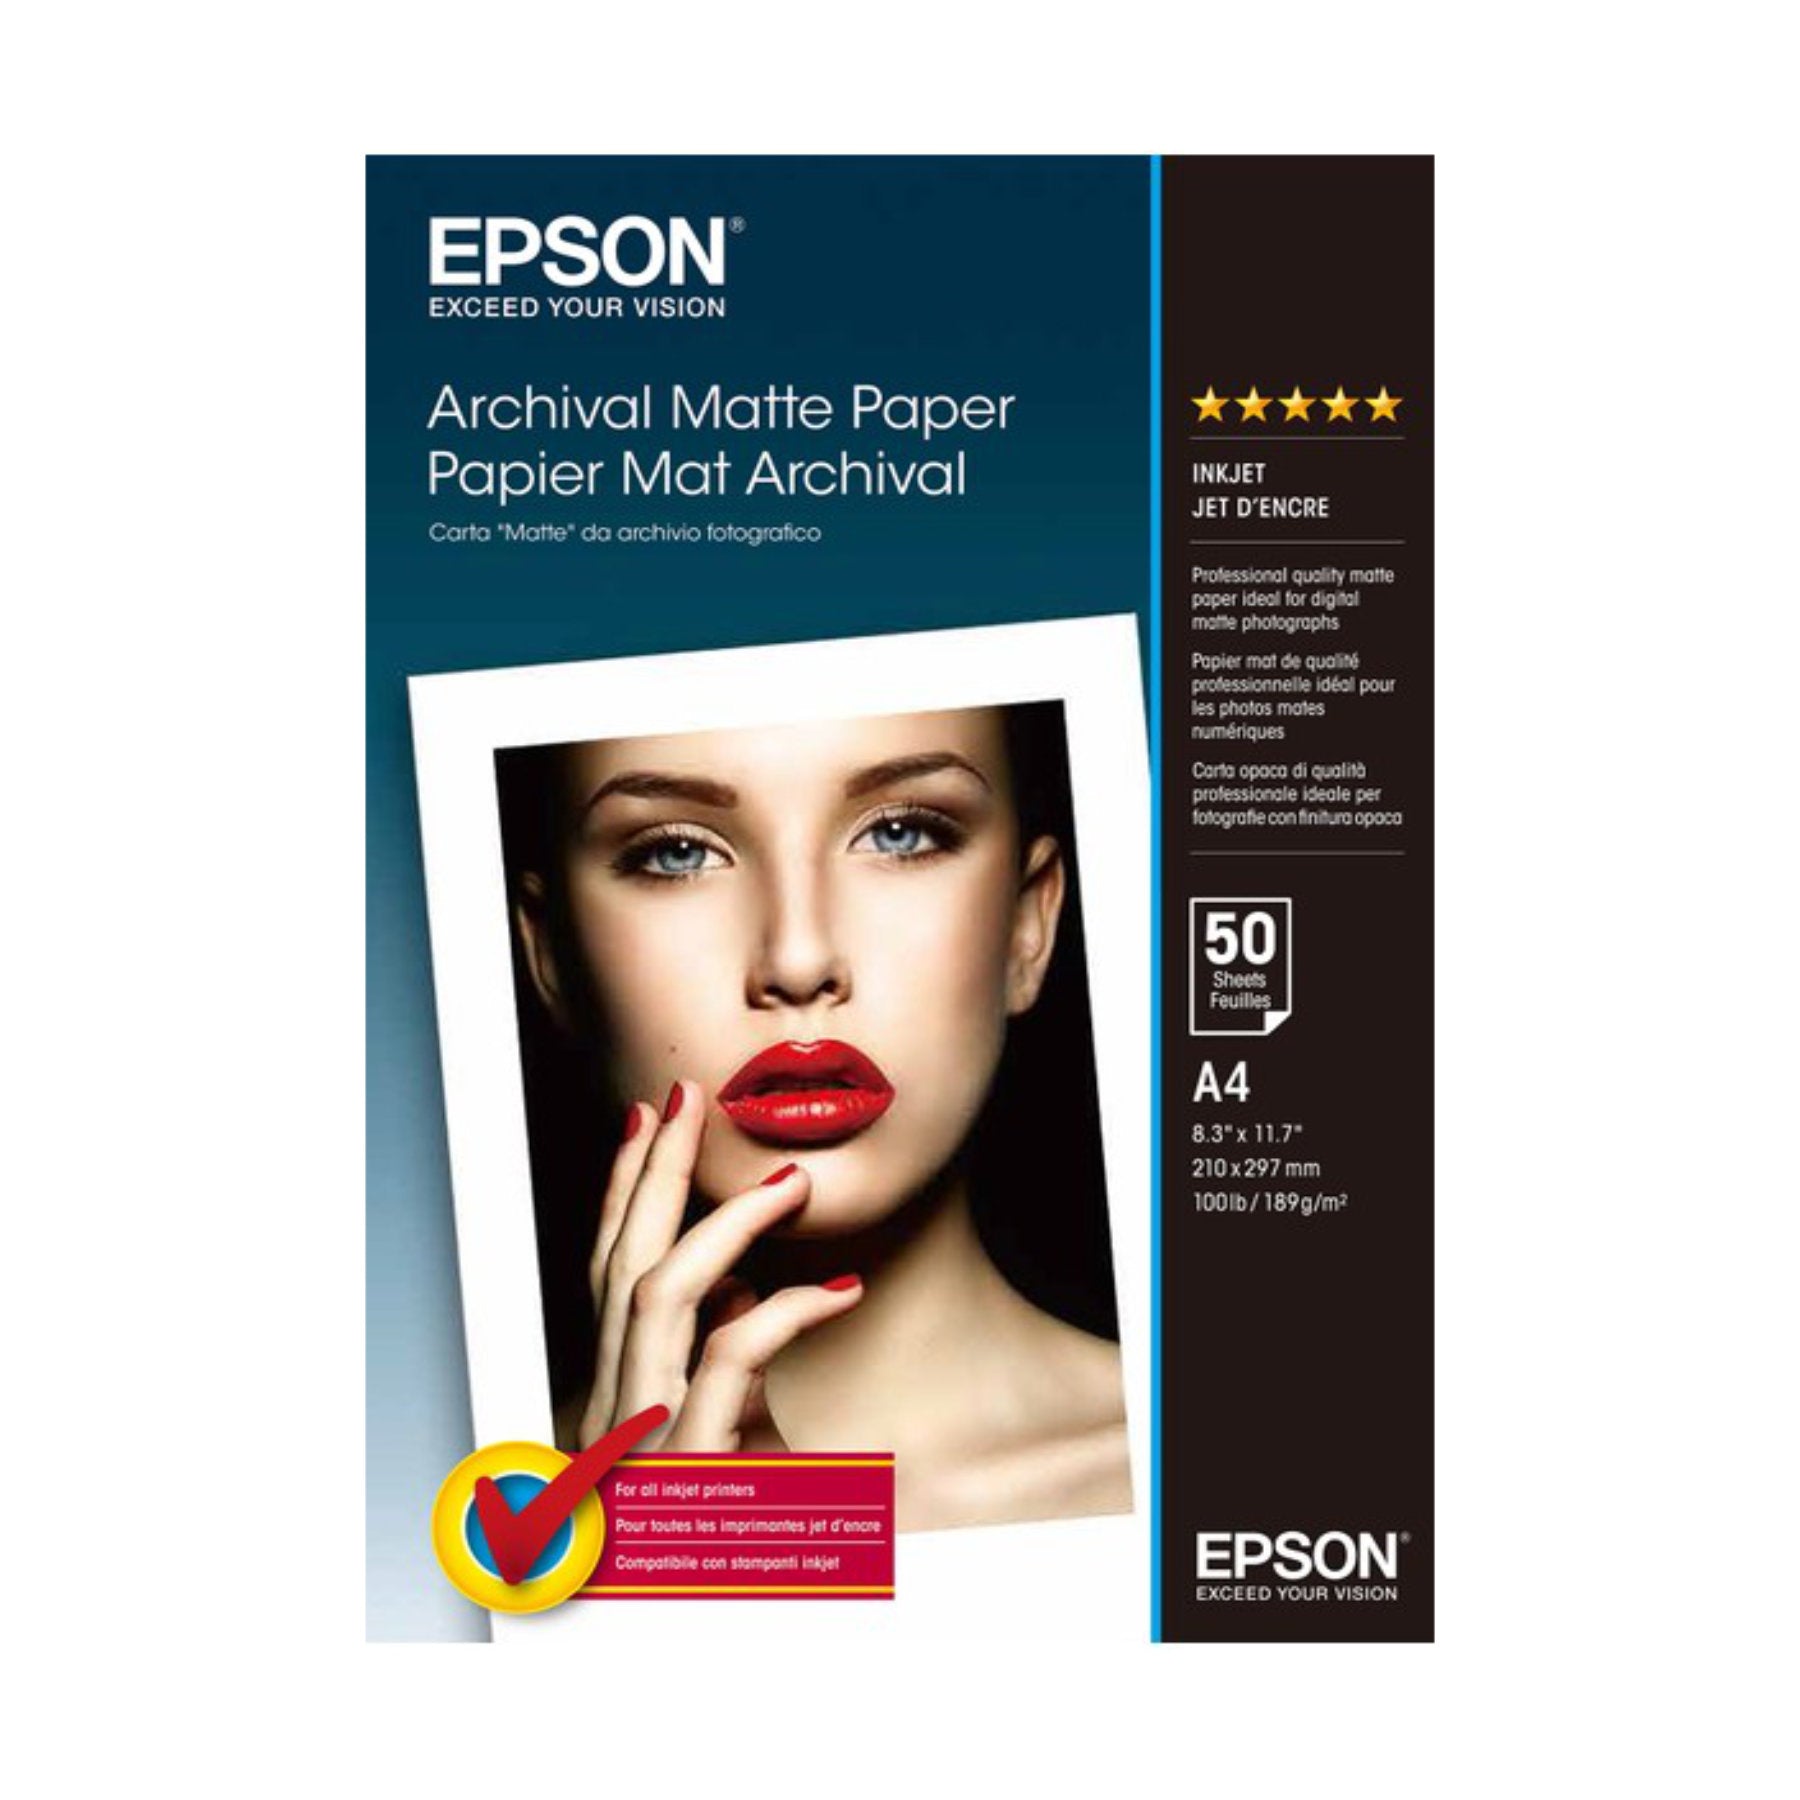 Buy Epson A4 Archival Matte Paper - 50 Sheets 189gsm at Topic Store